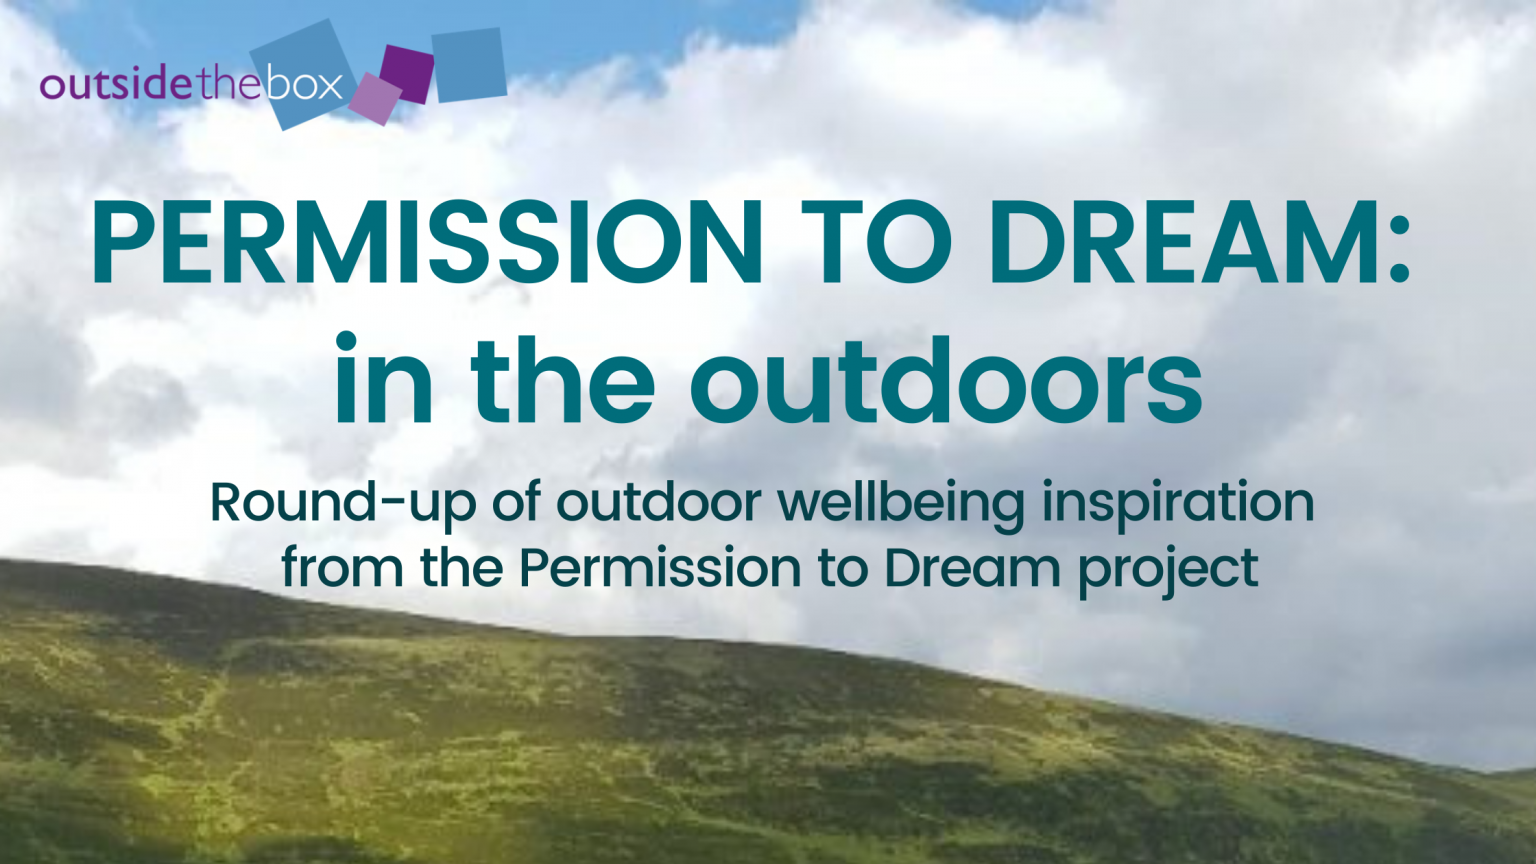 Permission to Dream - in the outdoors. A round-up of outdoors wellbeing inspiration